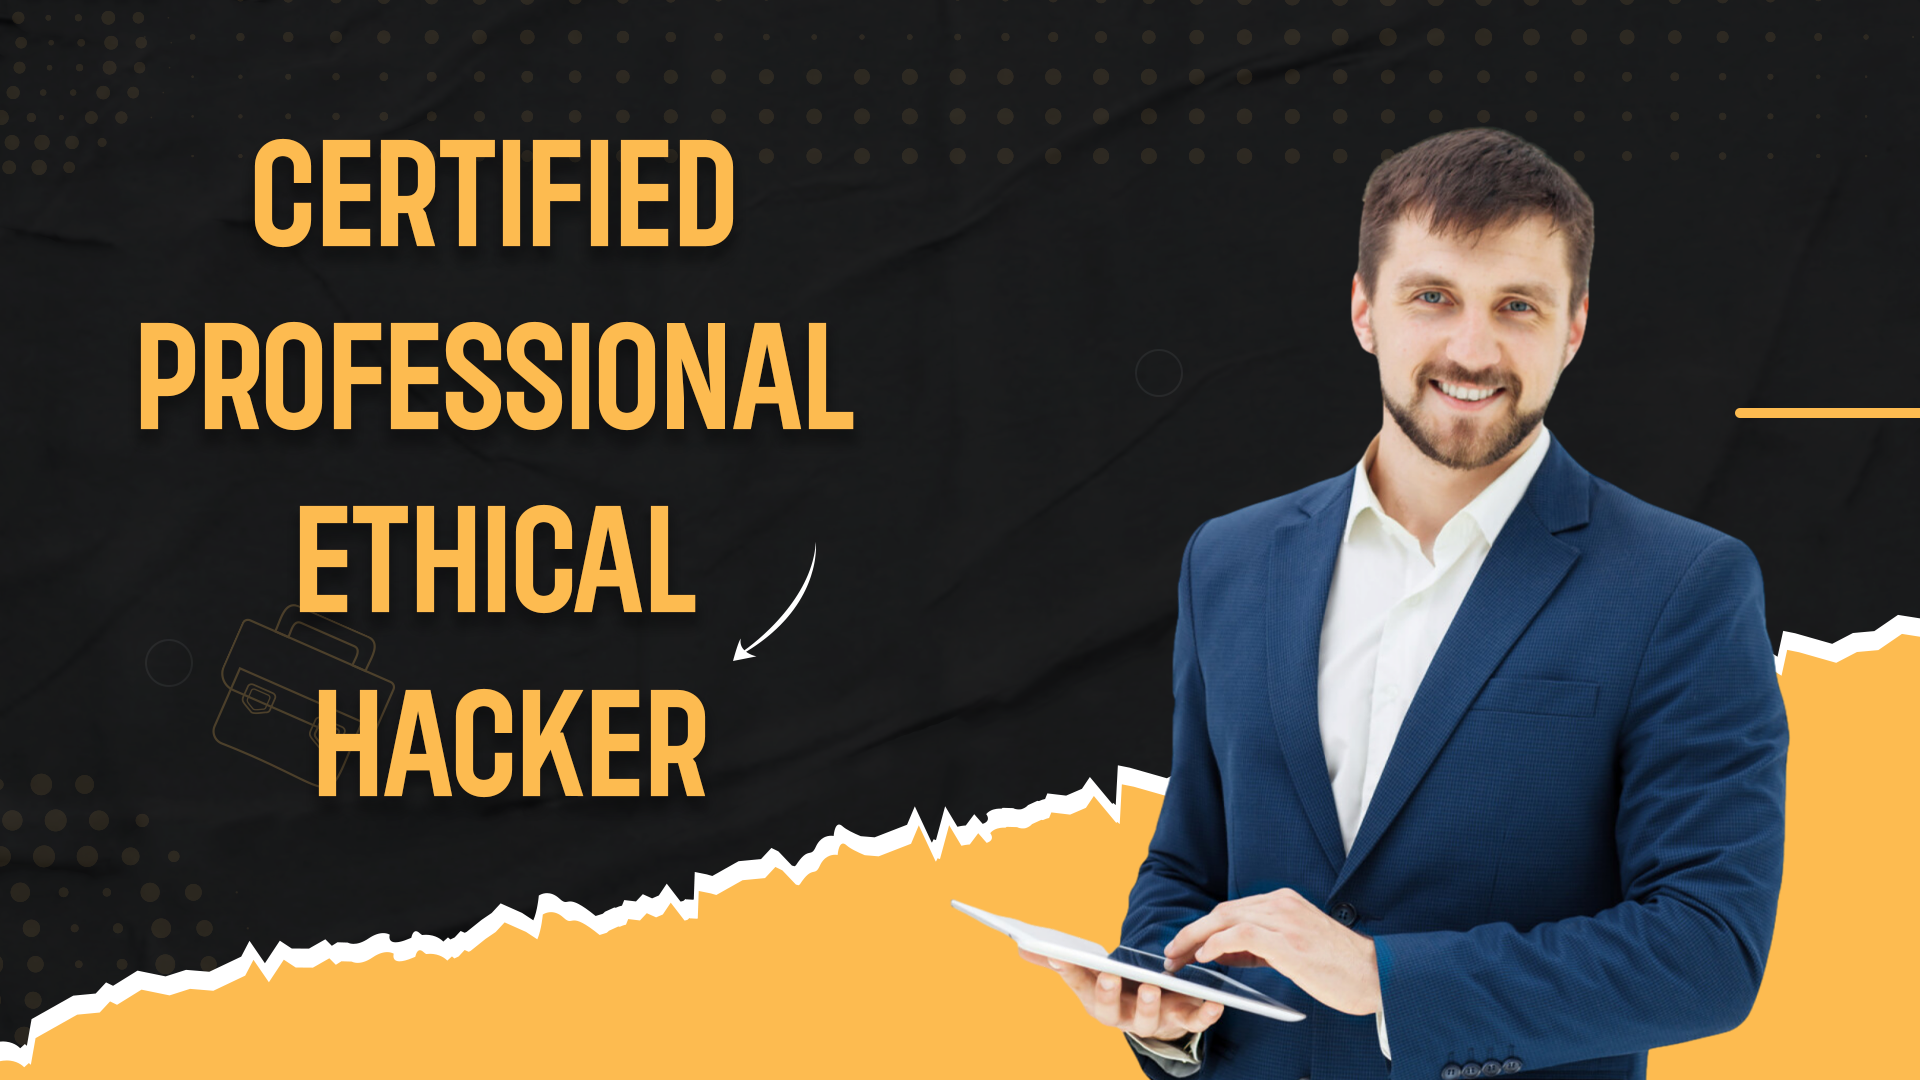 Certified Professional Ethical Hacker Course Online